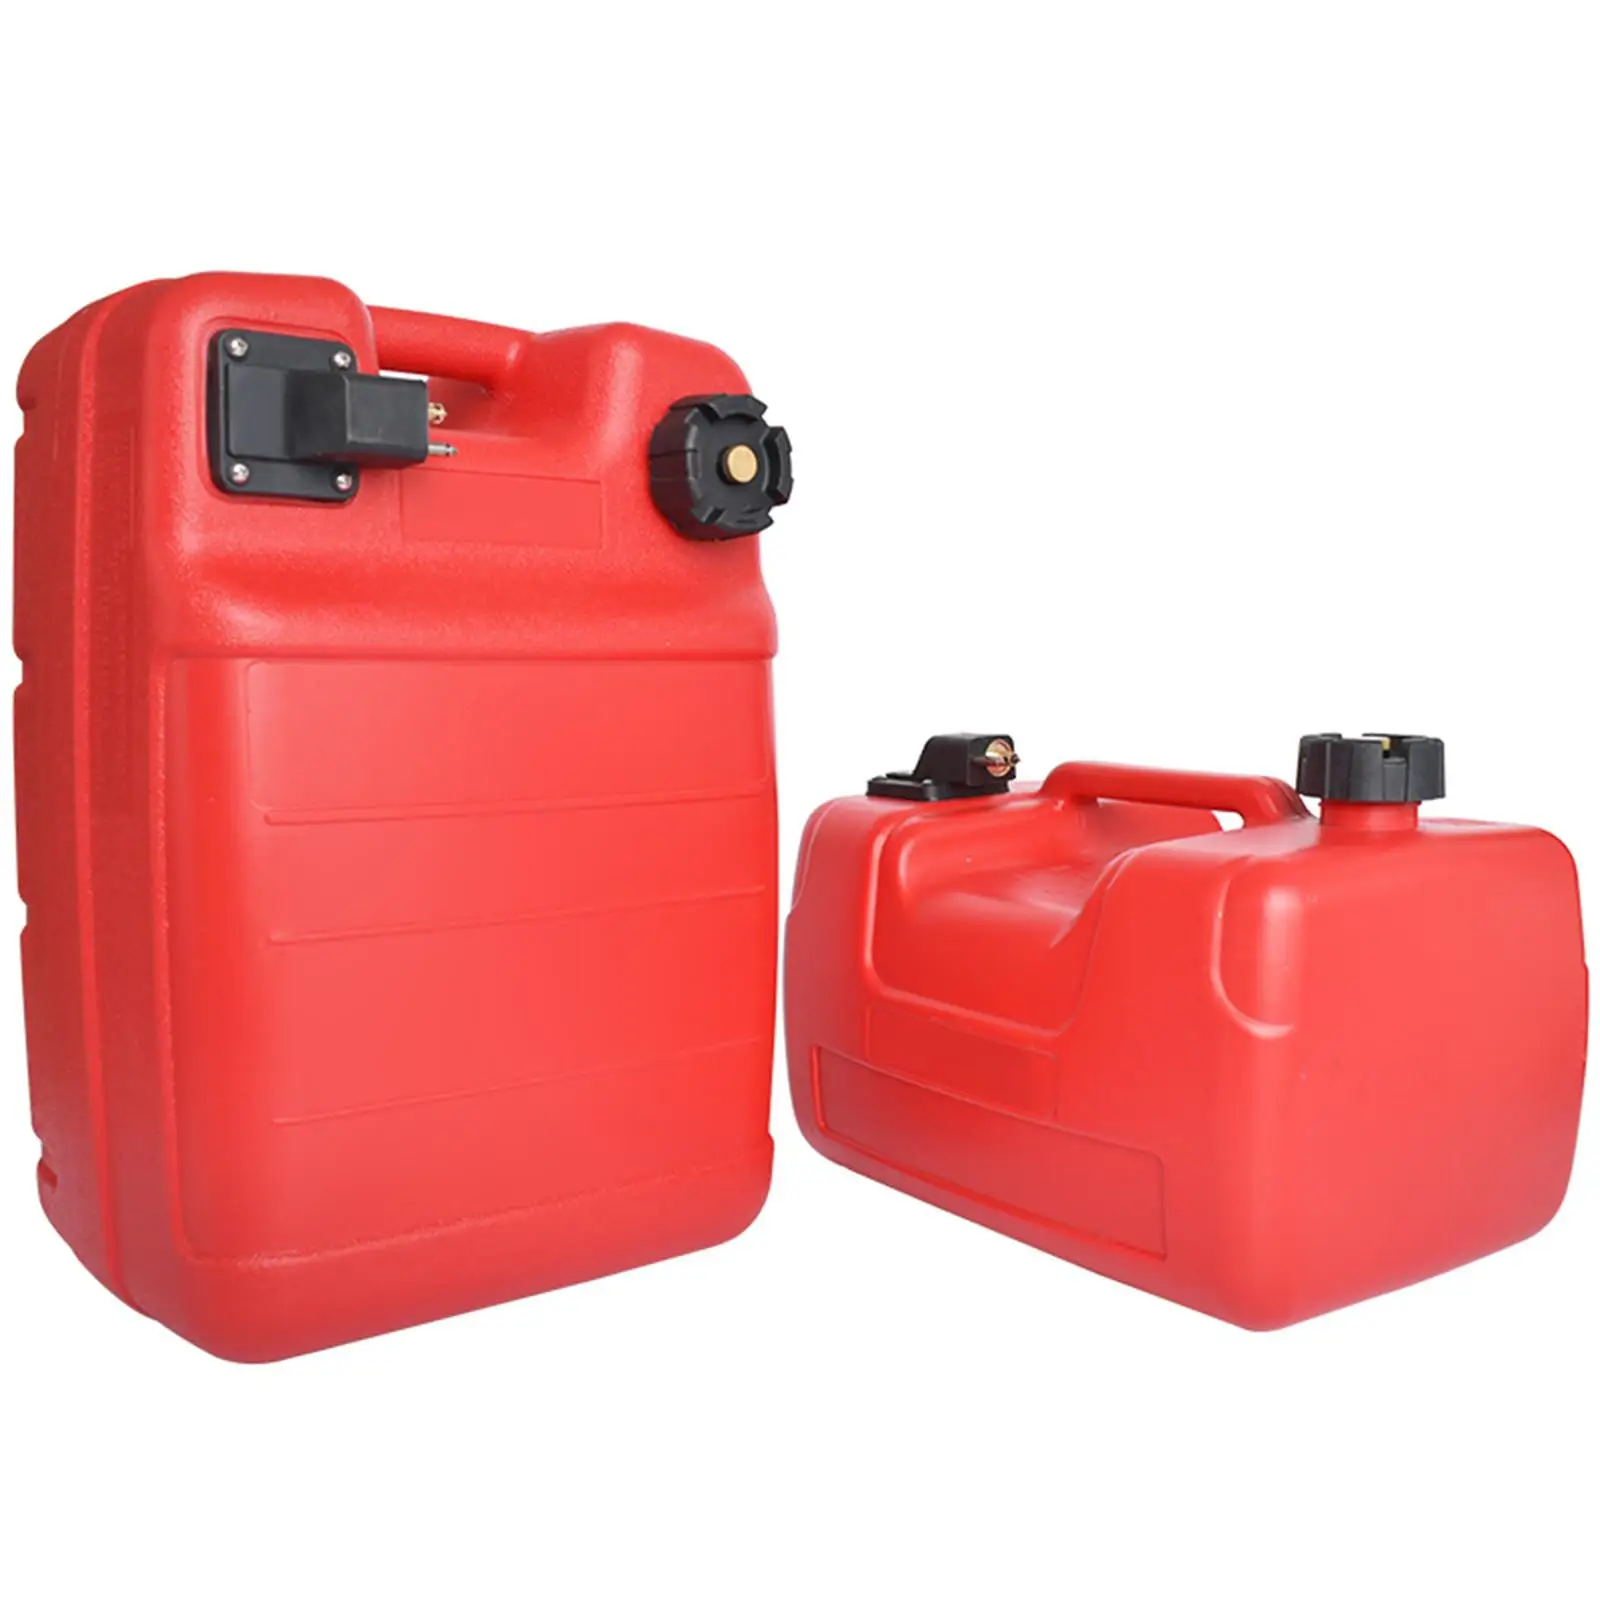  Boat Parts for   Universal Petrol Gasoline Can Fuel Tank Gas Tank